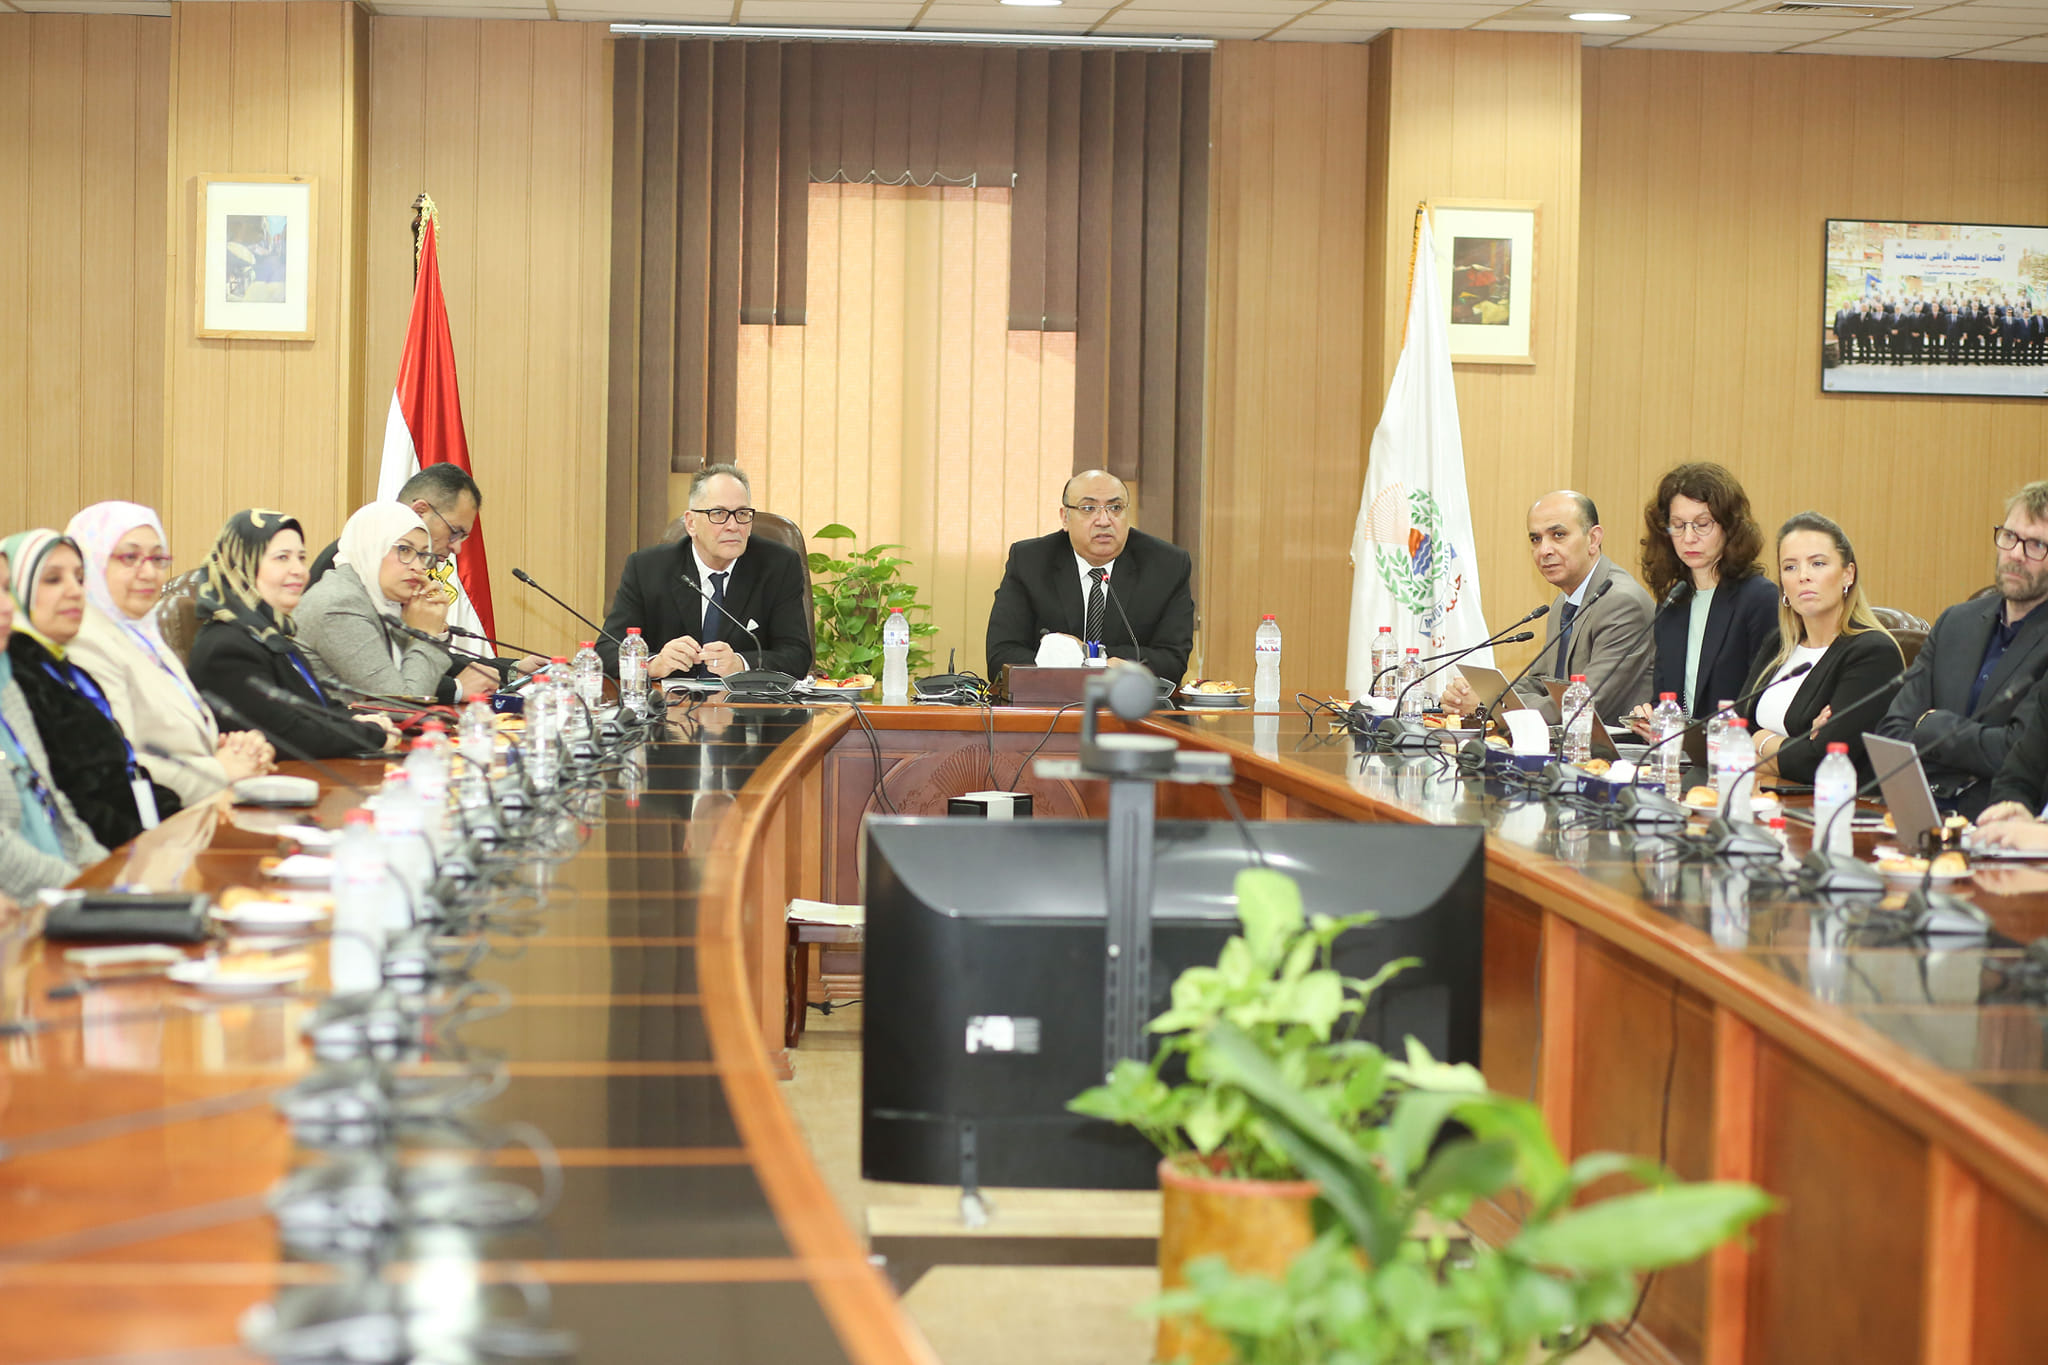 A delegation from the German Commission for International Accreditation at Mansoura University to accredit the Faculty of Nursing